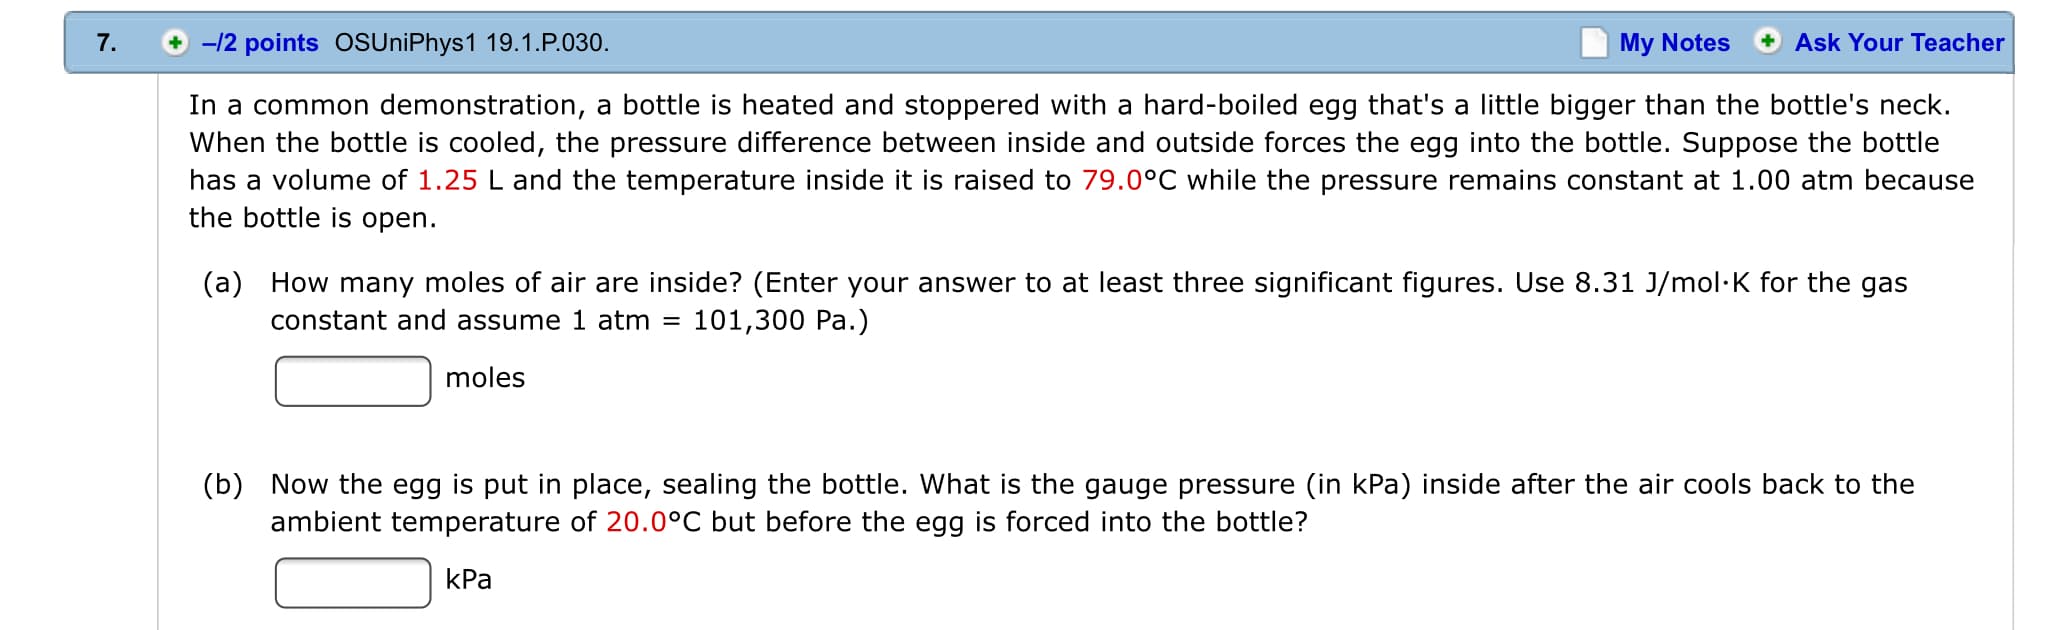 +-12 points oSUniPhys1 19.1.P.030.
7.
My Notes
Ask Your Teacher
In a common demonstration, a bottle is heated and stoppered with a hard-boiled egg that's a little bigger than the bottle's neck.
When the bottle is cooled, the pressure difference between inside and outside forces the egg into the bottle. Suppose the bottle
has a
volume of 1.25 L and the temperature inside it is raised to 79.0°C while the pressure remains constant at 1.00 atm because
the bottle is open
(a) How many moles of air are inside? (Enter your answer to at least three significant figures. Use 8.31 J/mol K for the gas
constant and assume 1 atm =
101,300 Pa.)
moles
Now the egg is put in place, sealing the bottle. What is the gauge pressure (in kPa) inside after the air cools back to the
(b)
ambient temperature of 20.0°C but before the egg is forced into the bottle?
kPa
